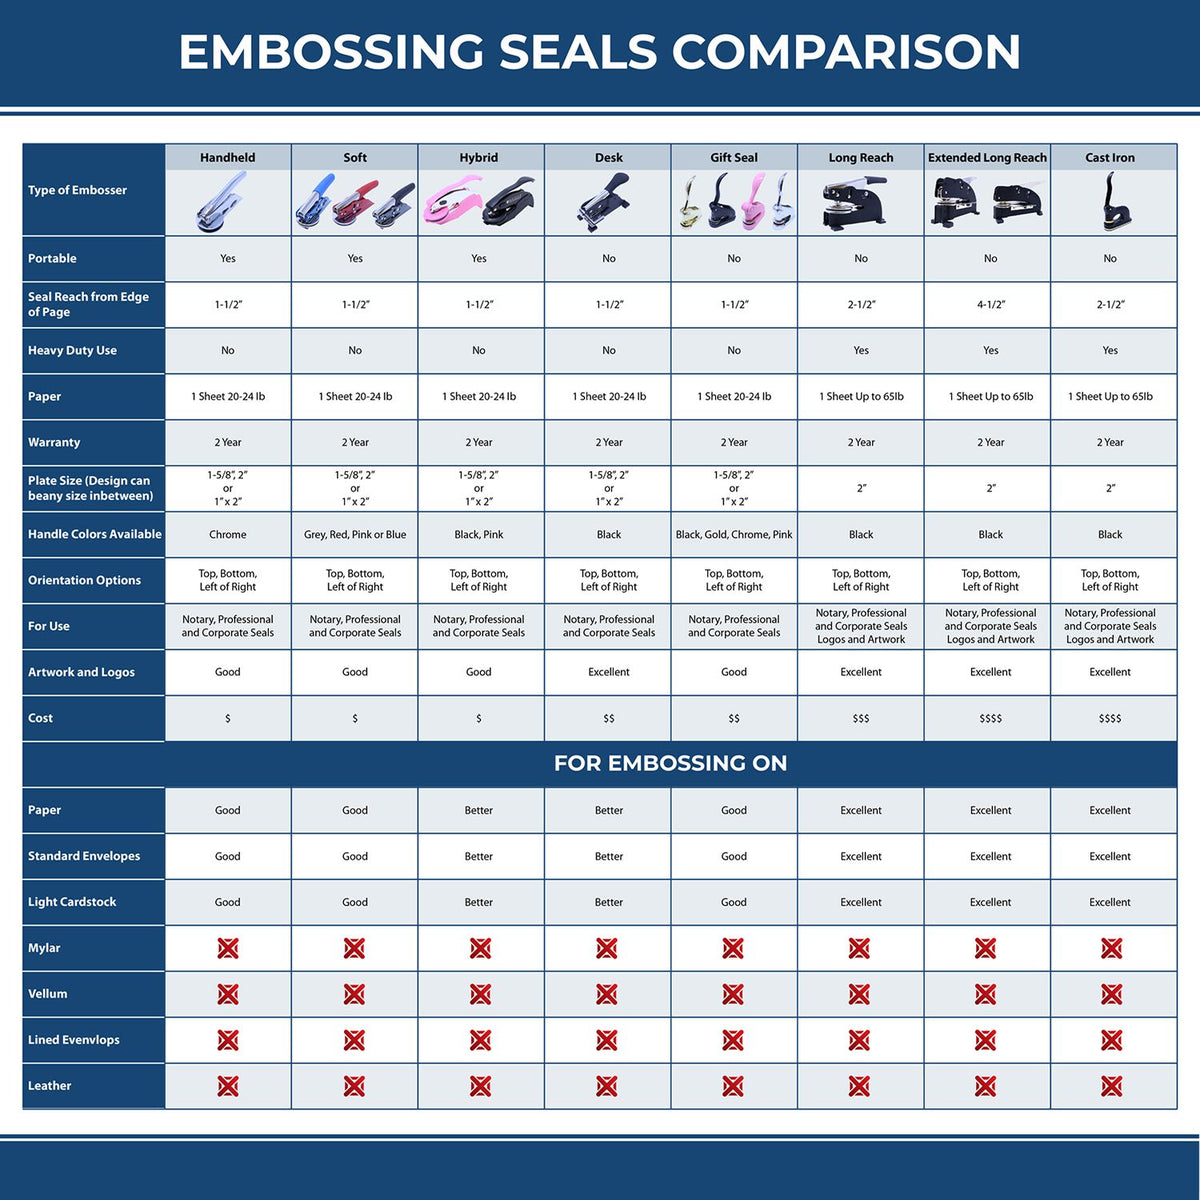 A comparison chart for the different types of mount models available for the Hybrid Indiana Engineer Seal